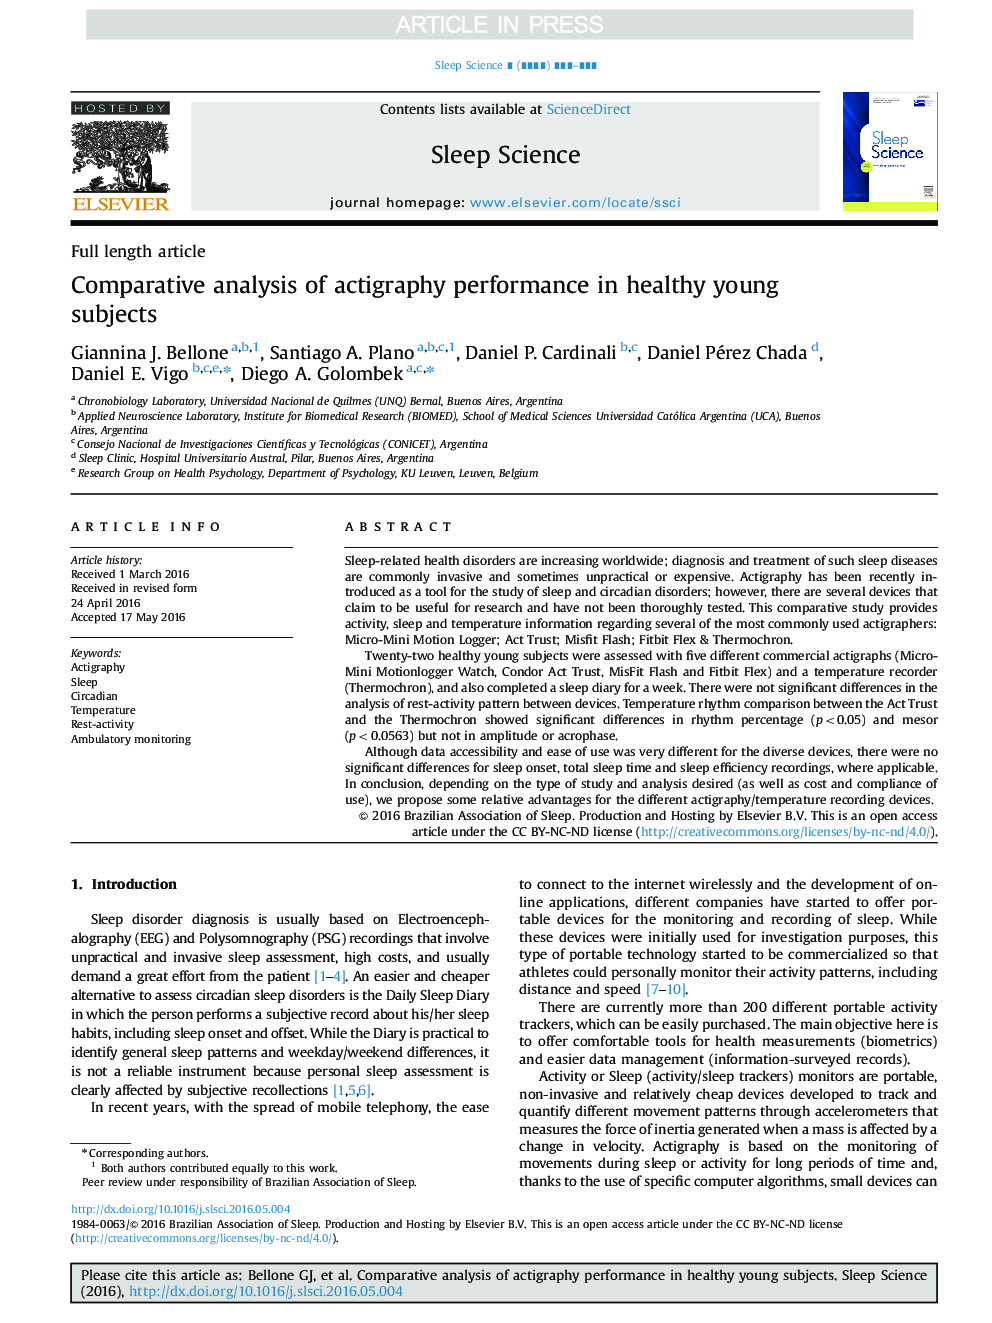 Comparative analysis of actigraphy performance in healthy young subjects